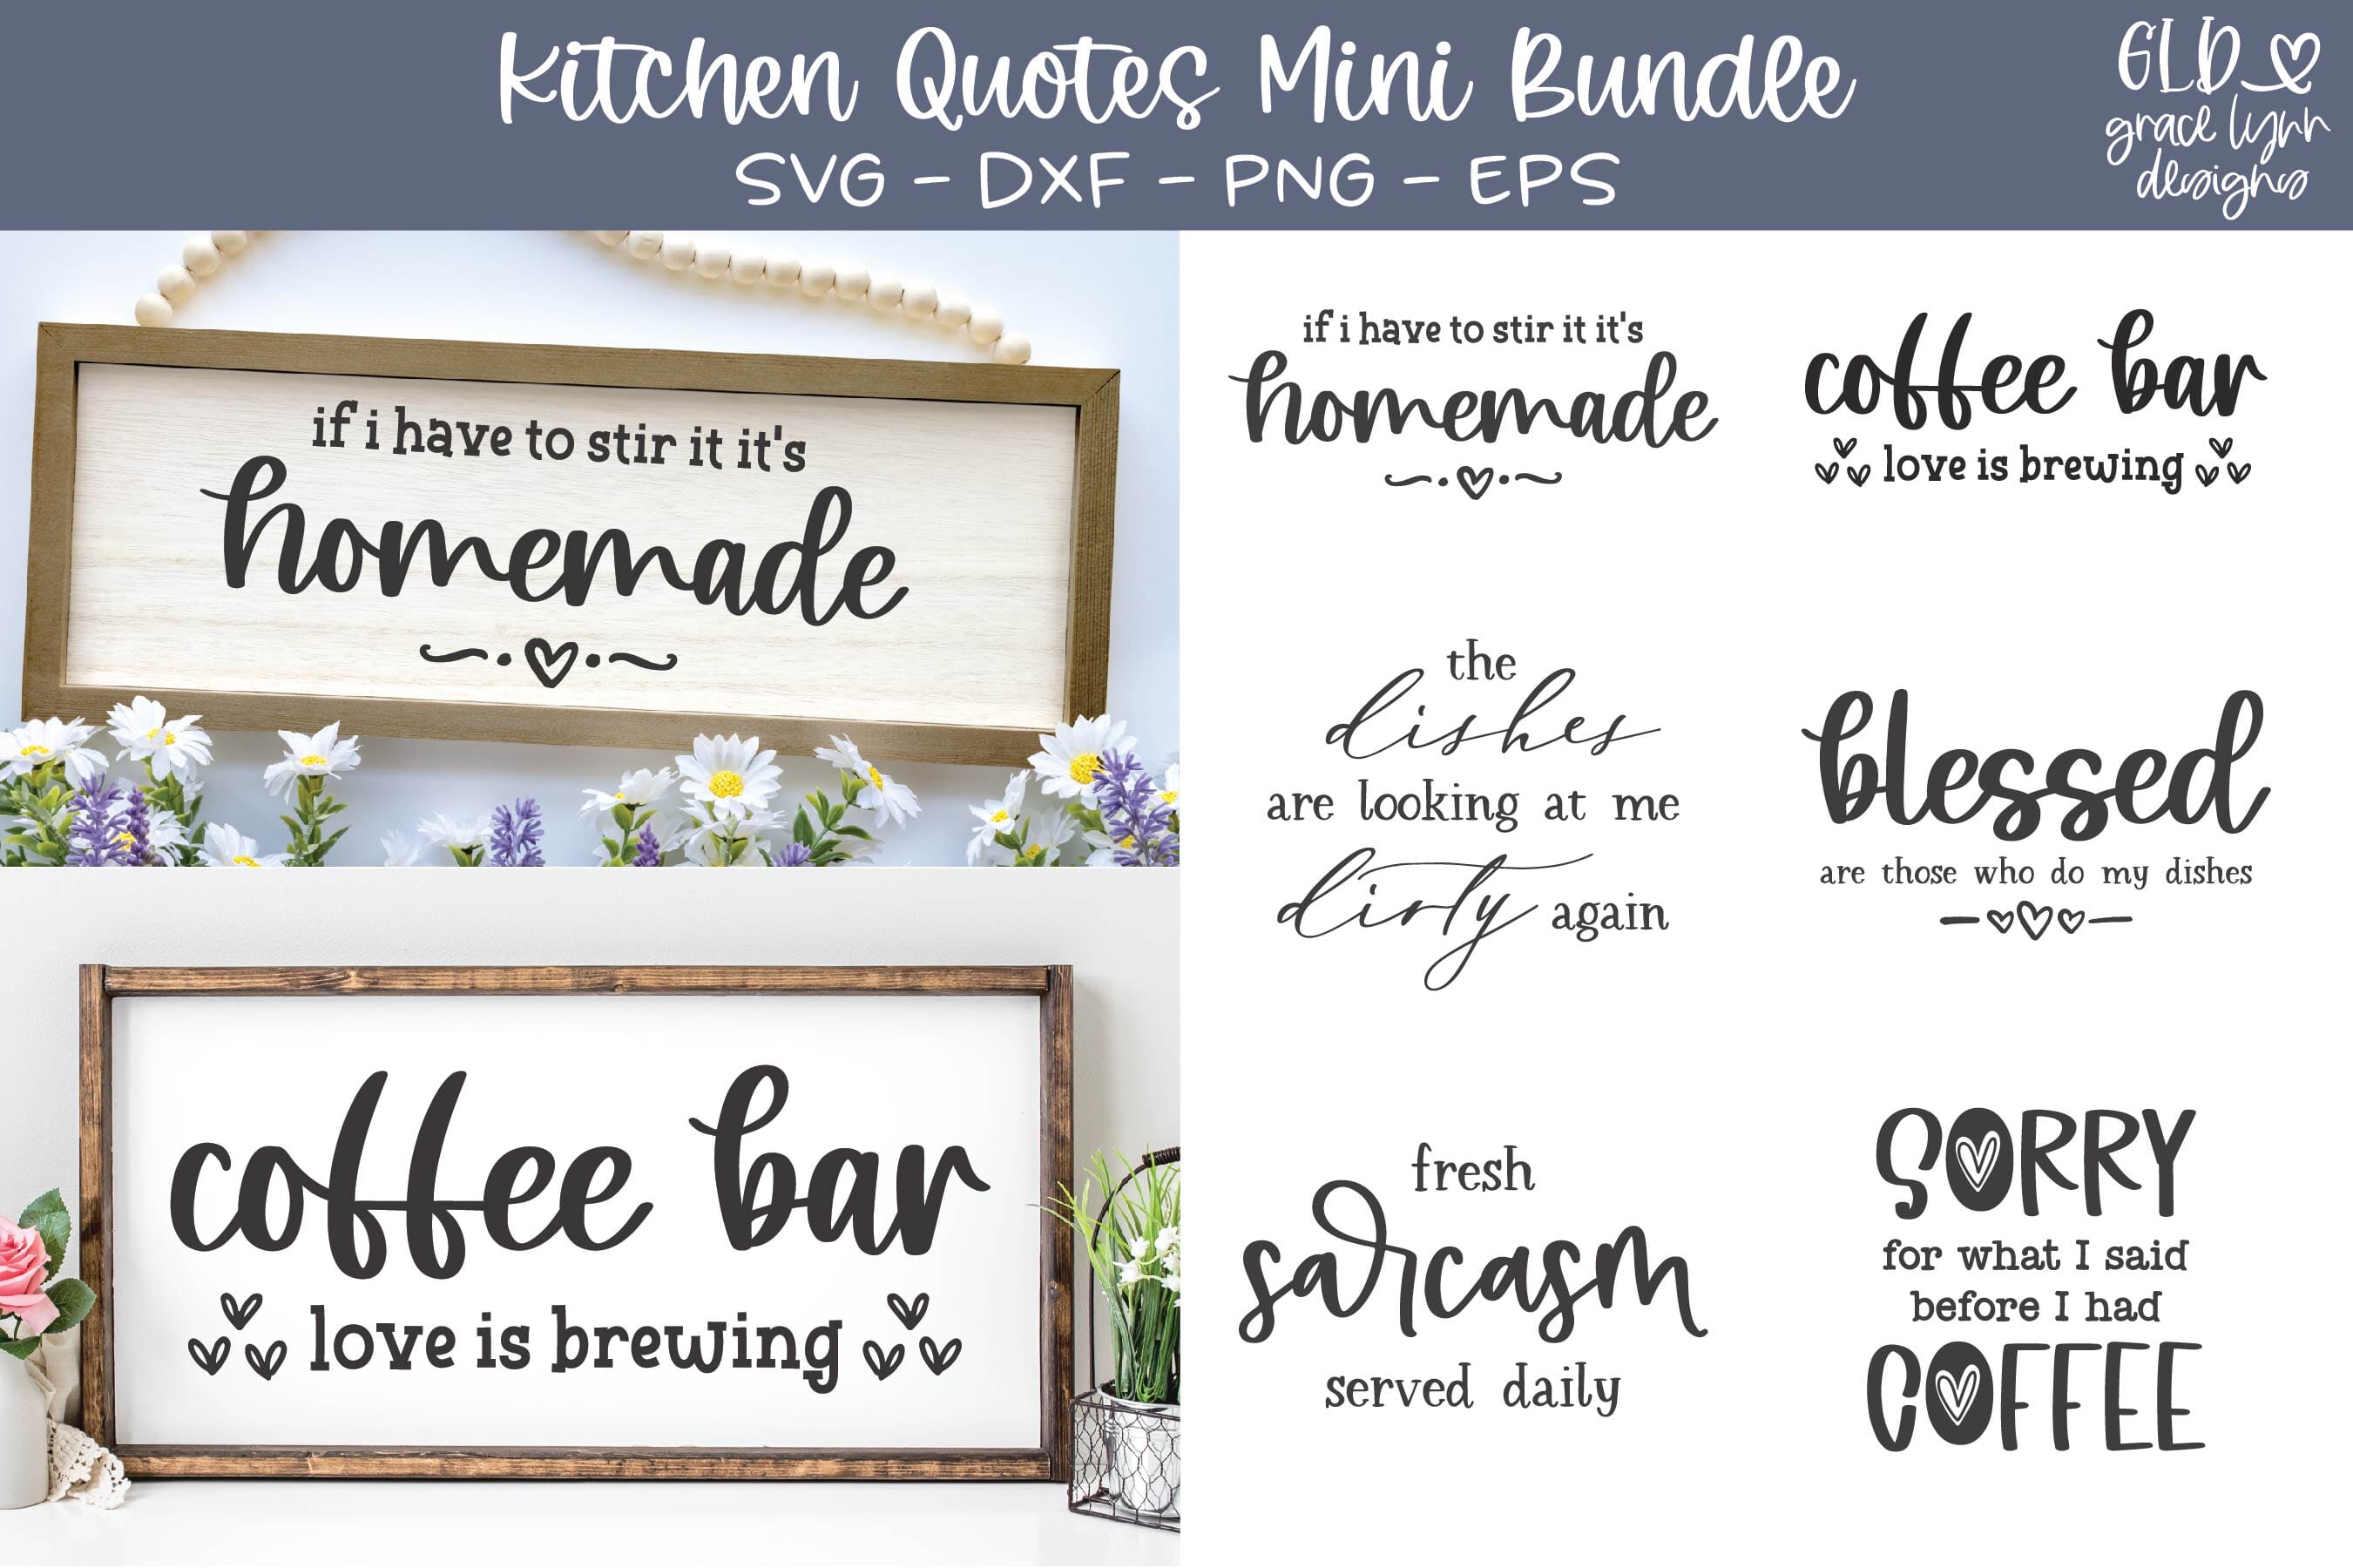 Funny Kitchen SVG Bundle SVG Cut File SVGs,Quotes and Sayings,Food &  Drink,On Sale, Print & Cut - So Fontsy